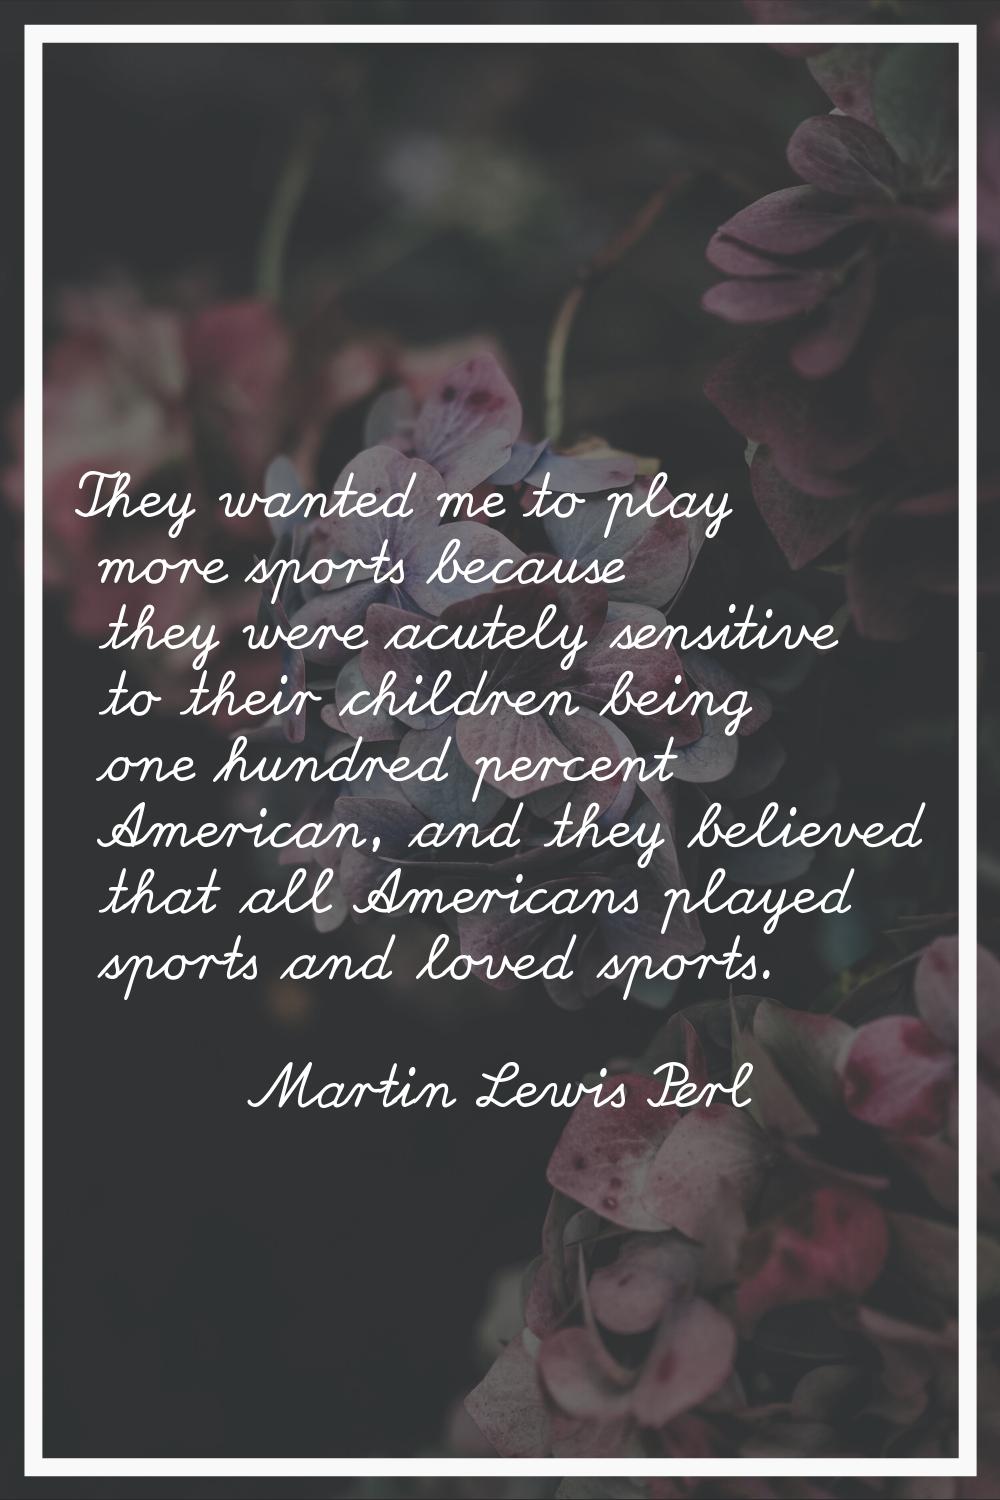 They wanted me to play more sports because they were acutely sensitive to their children being one 